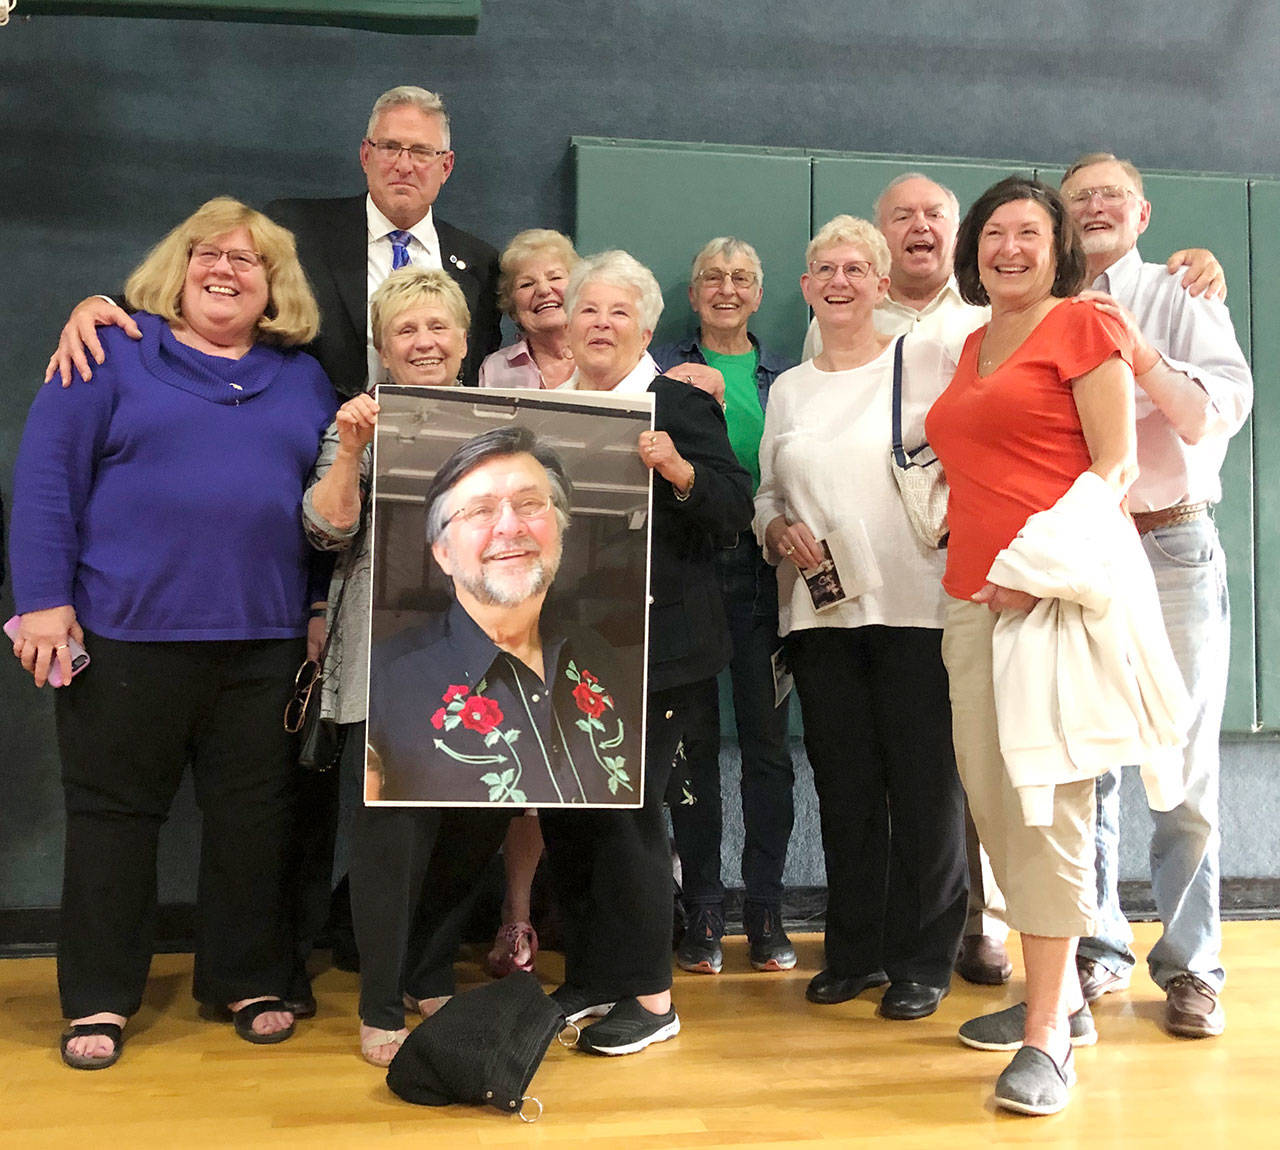 Taking part in a Celebration of Life for Billy Nagler (in held picture) recently are club board members, from left, Pat McCauley, Tom Baermann, Dee Christensen, Carol Rutledge, Sherry Phillips, Isabelle Dunlap, Gini Hawe, Joe Hawe, Cathy Carl and Bryce Fish. Submitted photo